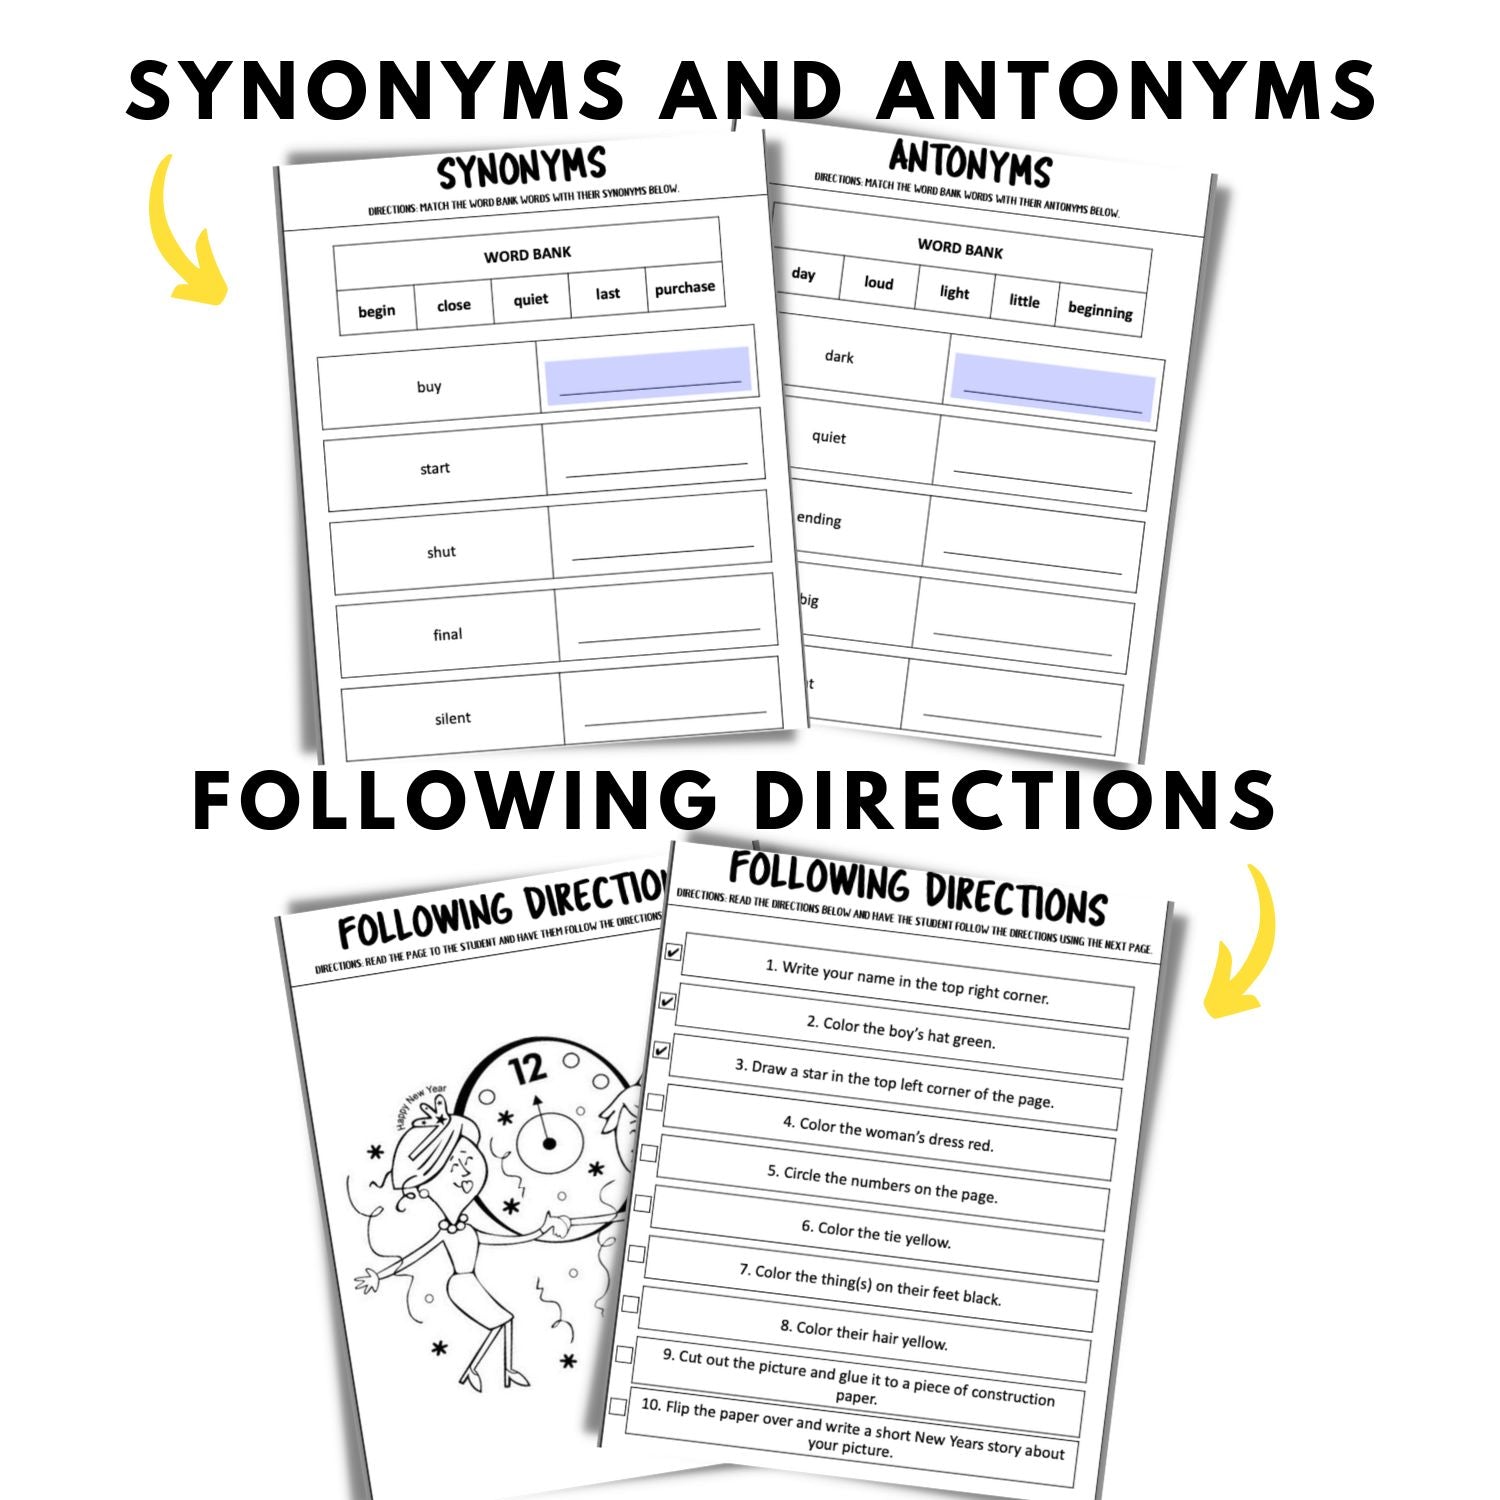 speech-therapy-new-years-synonyms-and-antonynms